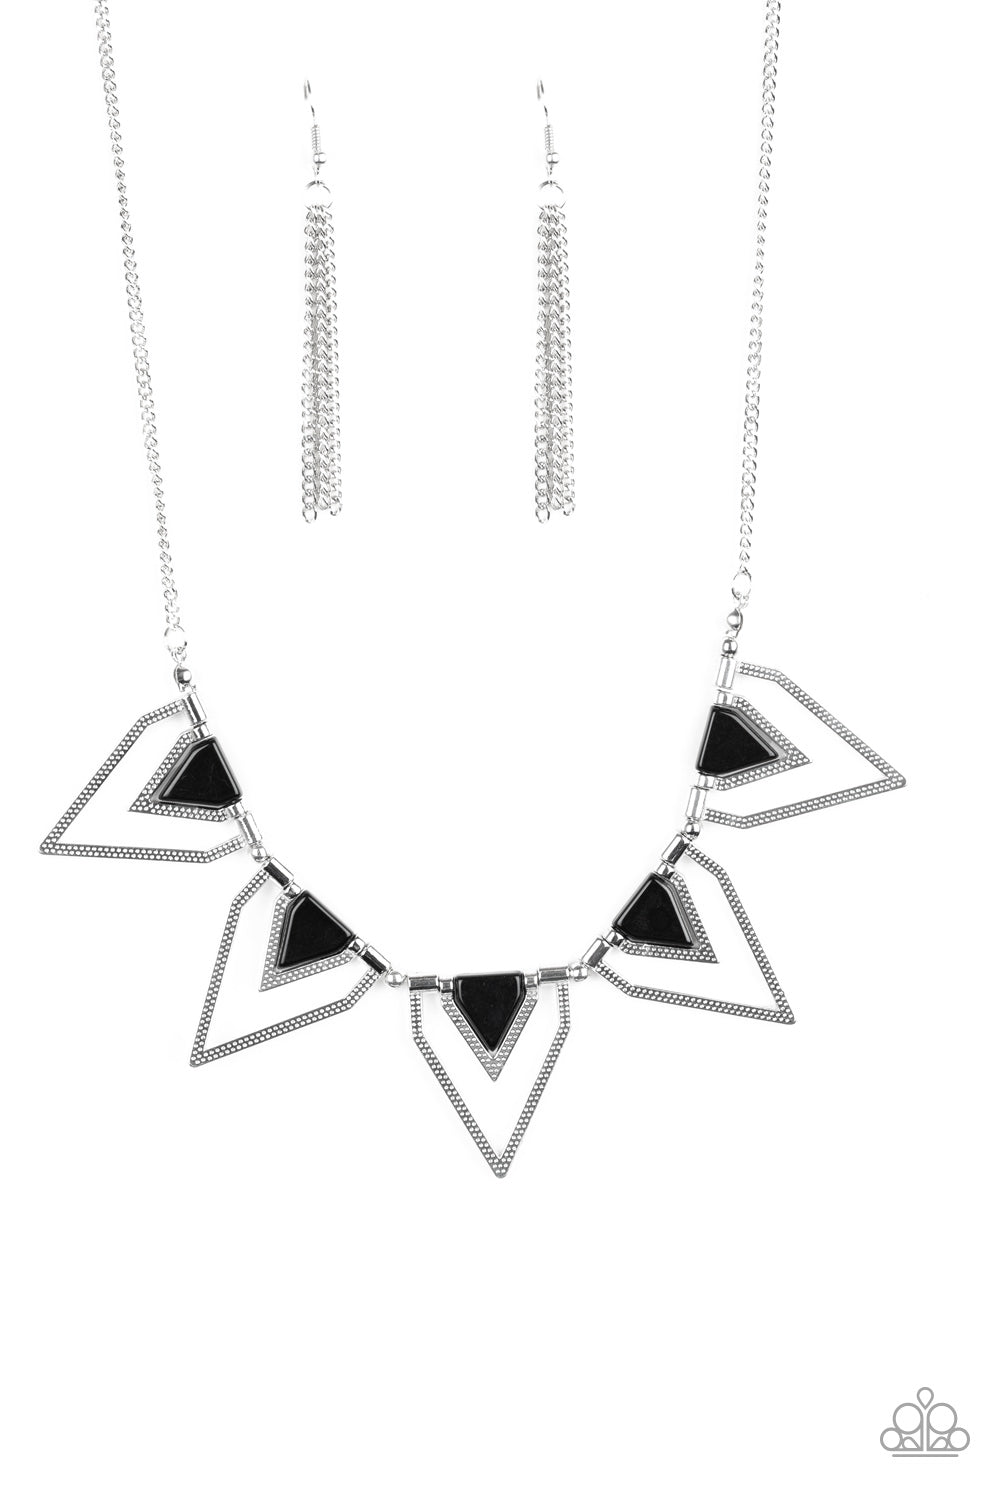 Infused with shiny black beading, glistening silver triangular frames join below the collar, creating a fierce geometric fringe. Features an adjustable clasp closure.